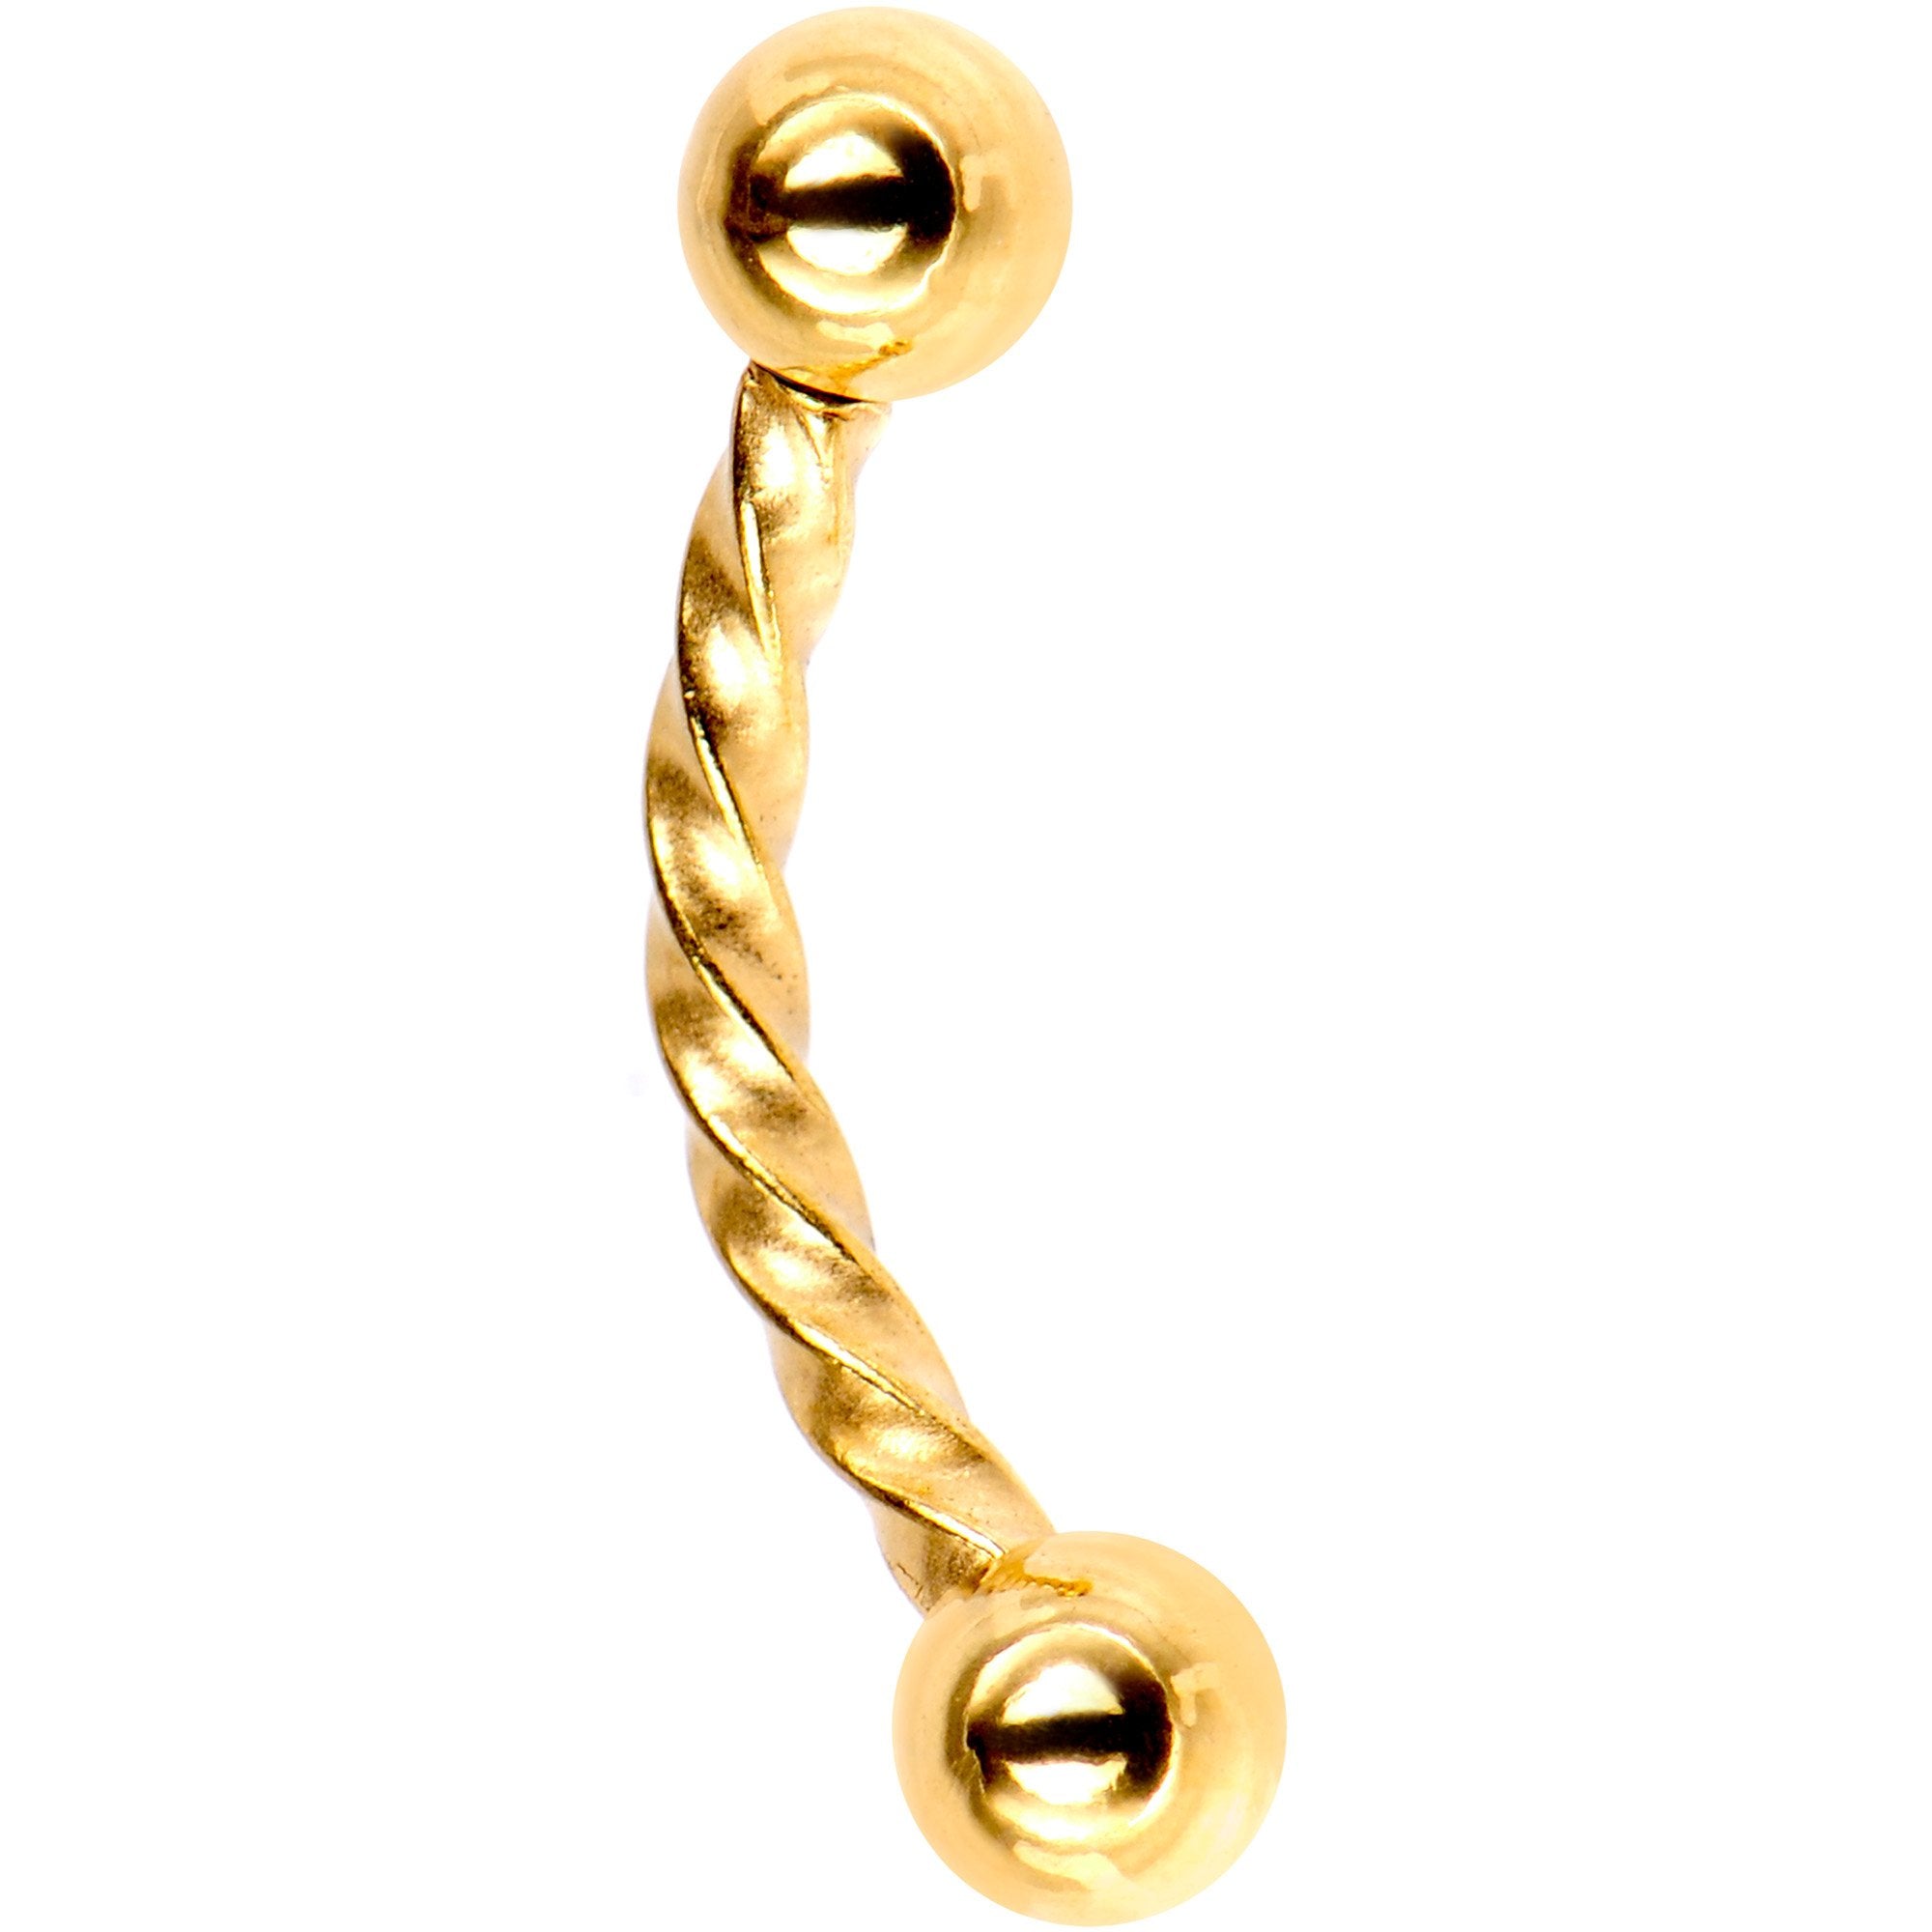 16 Gauge 5/16 Gold Tone IP Seriously Twisted Curved Eyebrow Ring